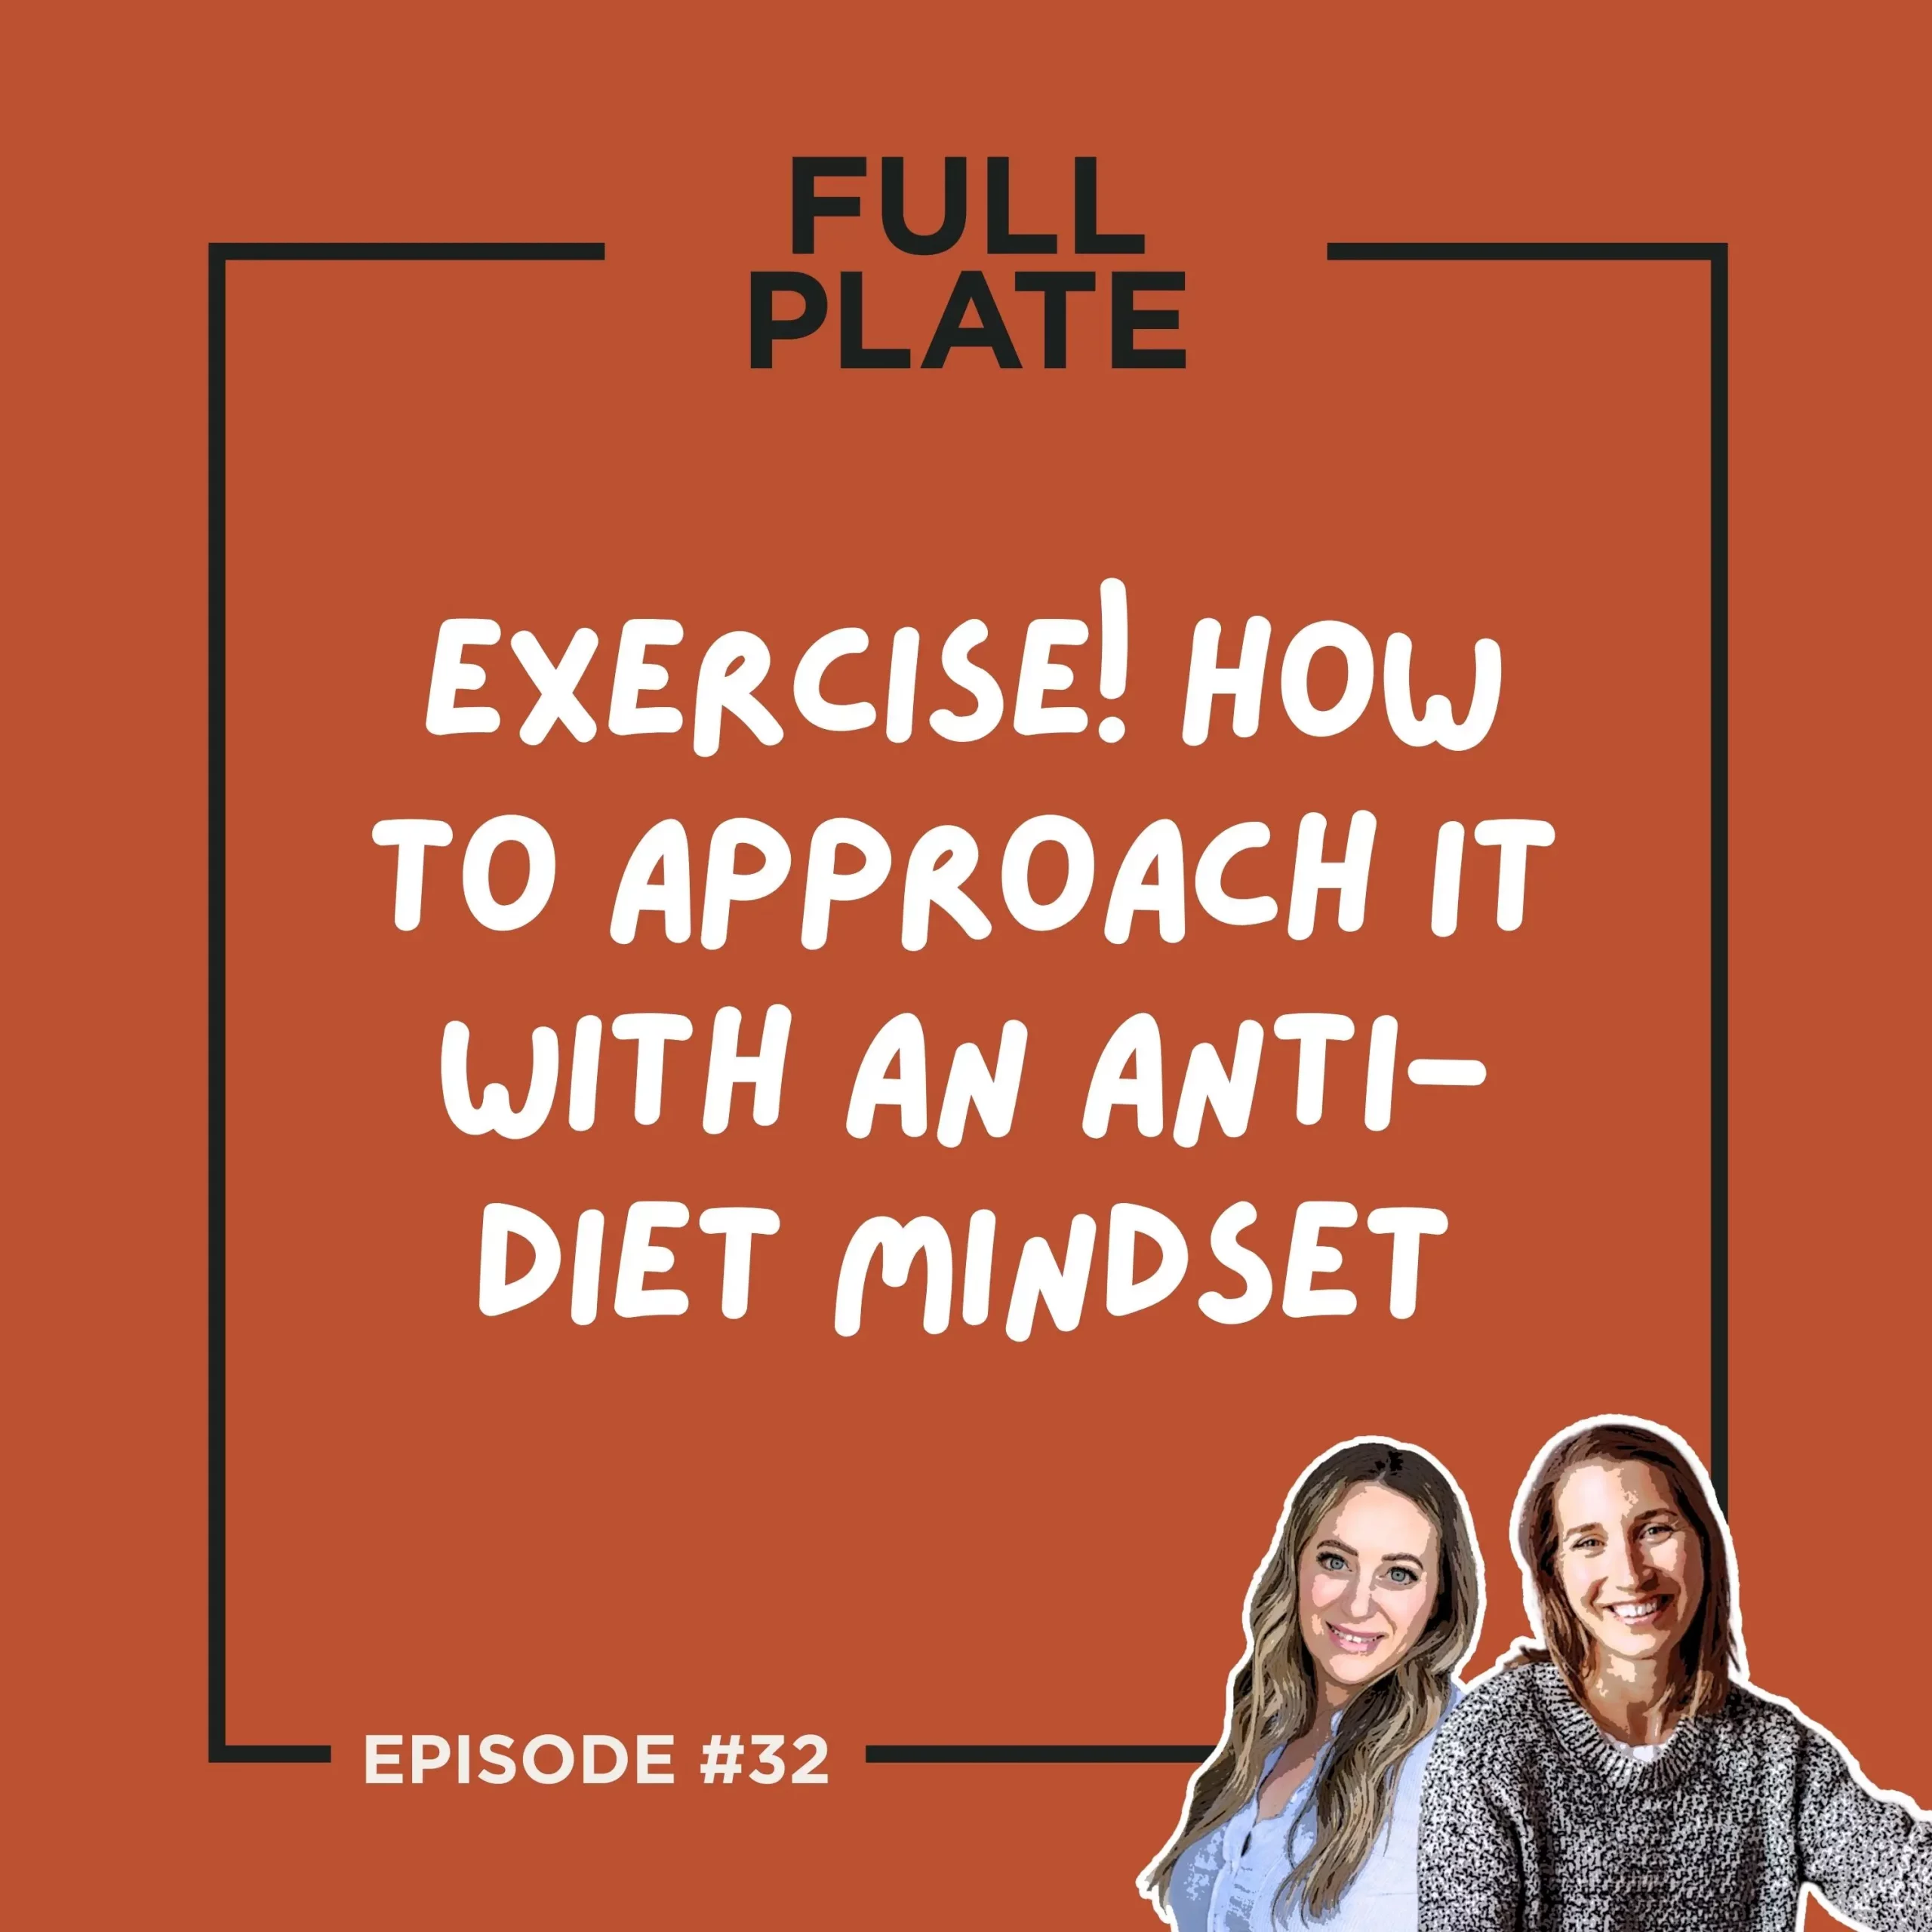 Full Plate Podcast | Ditch diet culture, respect your body, and set boundaries | Episode 32: Exercise! How to Approach it with an Anti-Diet Mindset